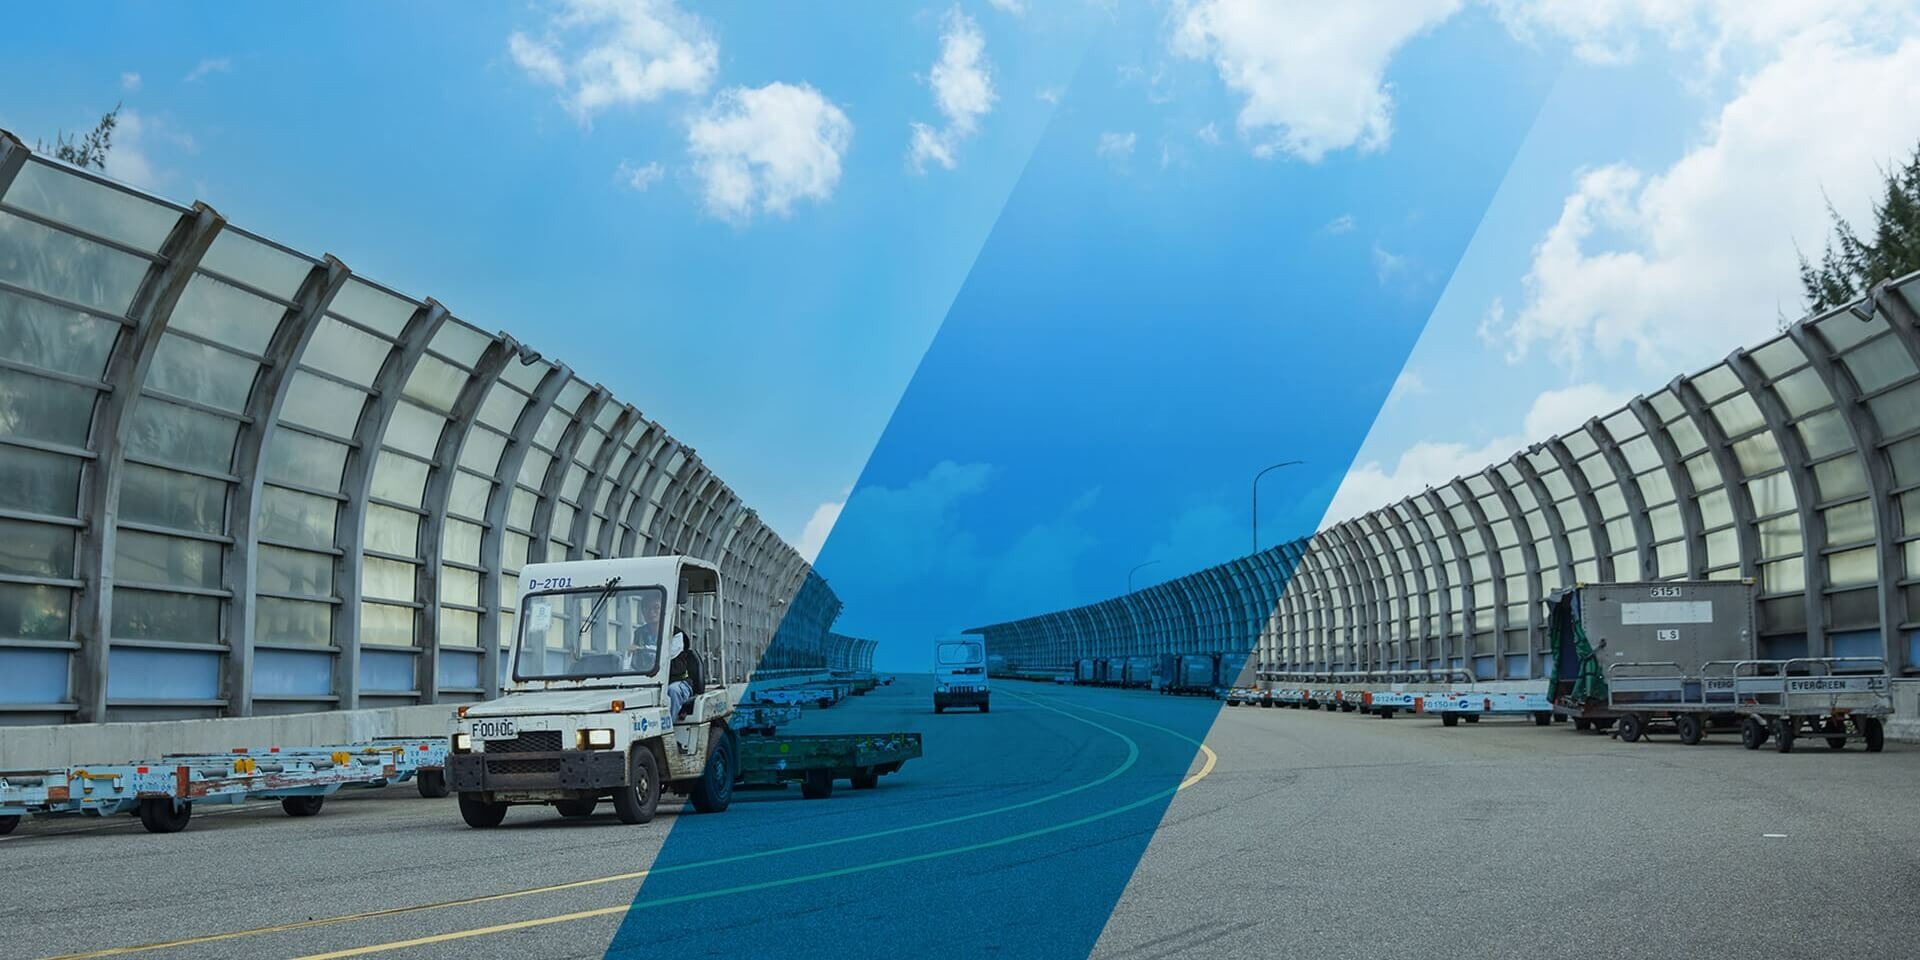 The global air cargo operation center integrating innovation and tax-free cargo logistics services, connecting your business to the international world